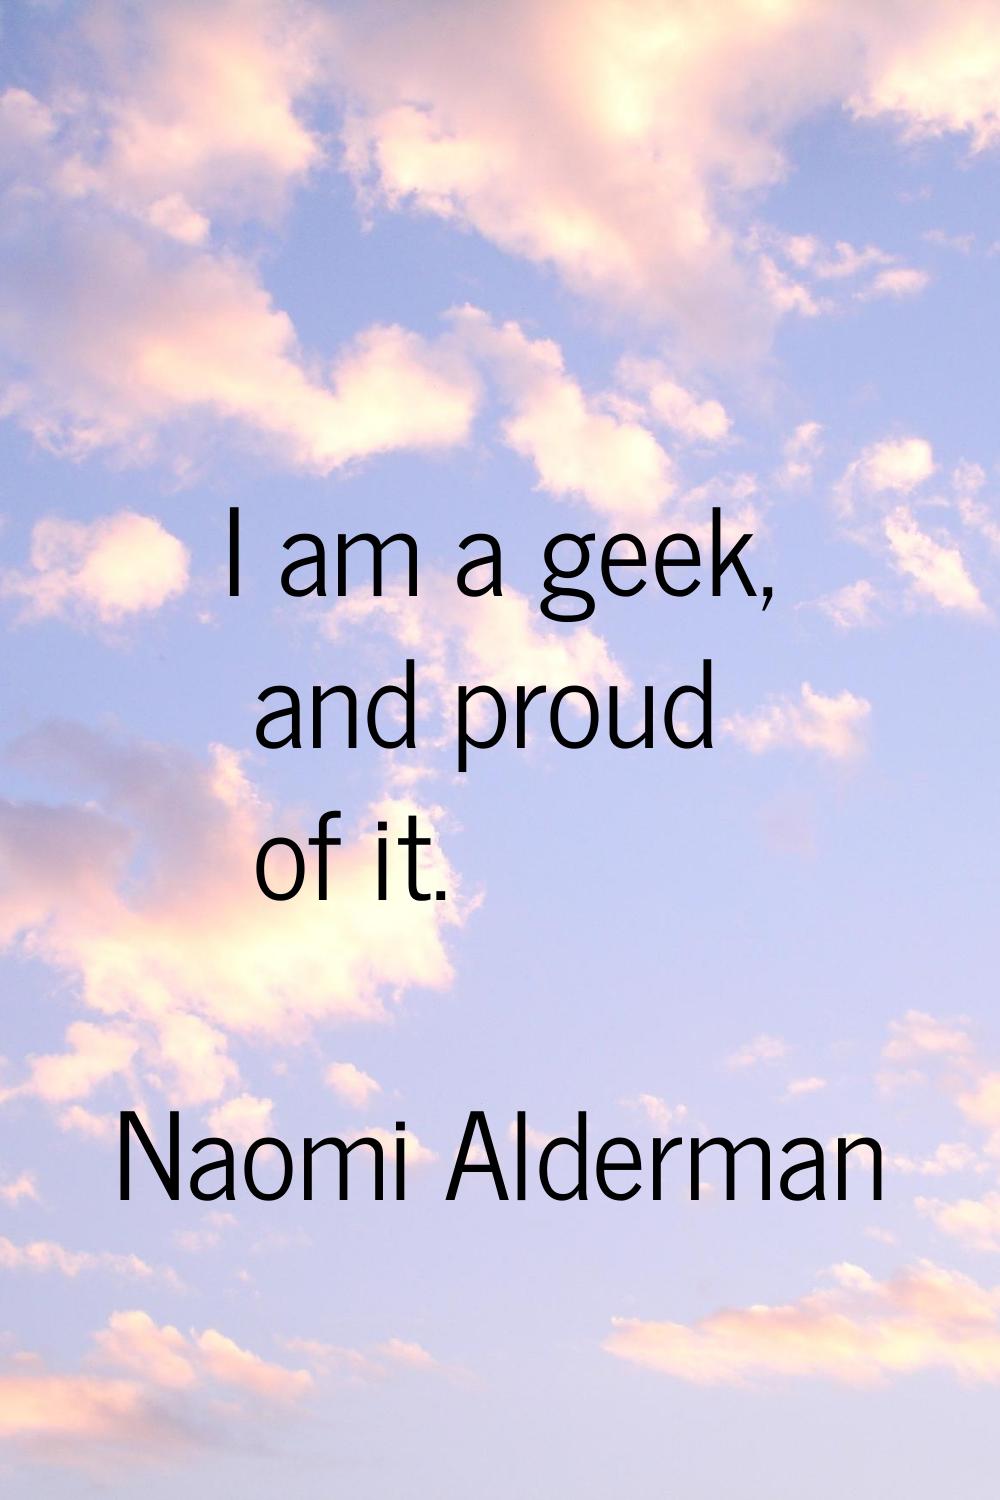 I am a geek, and proud of it.